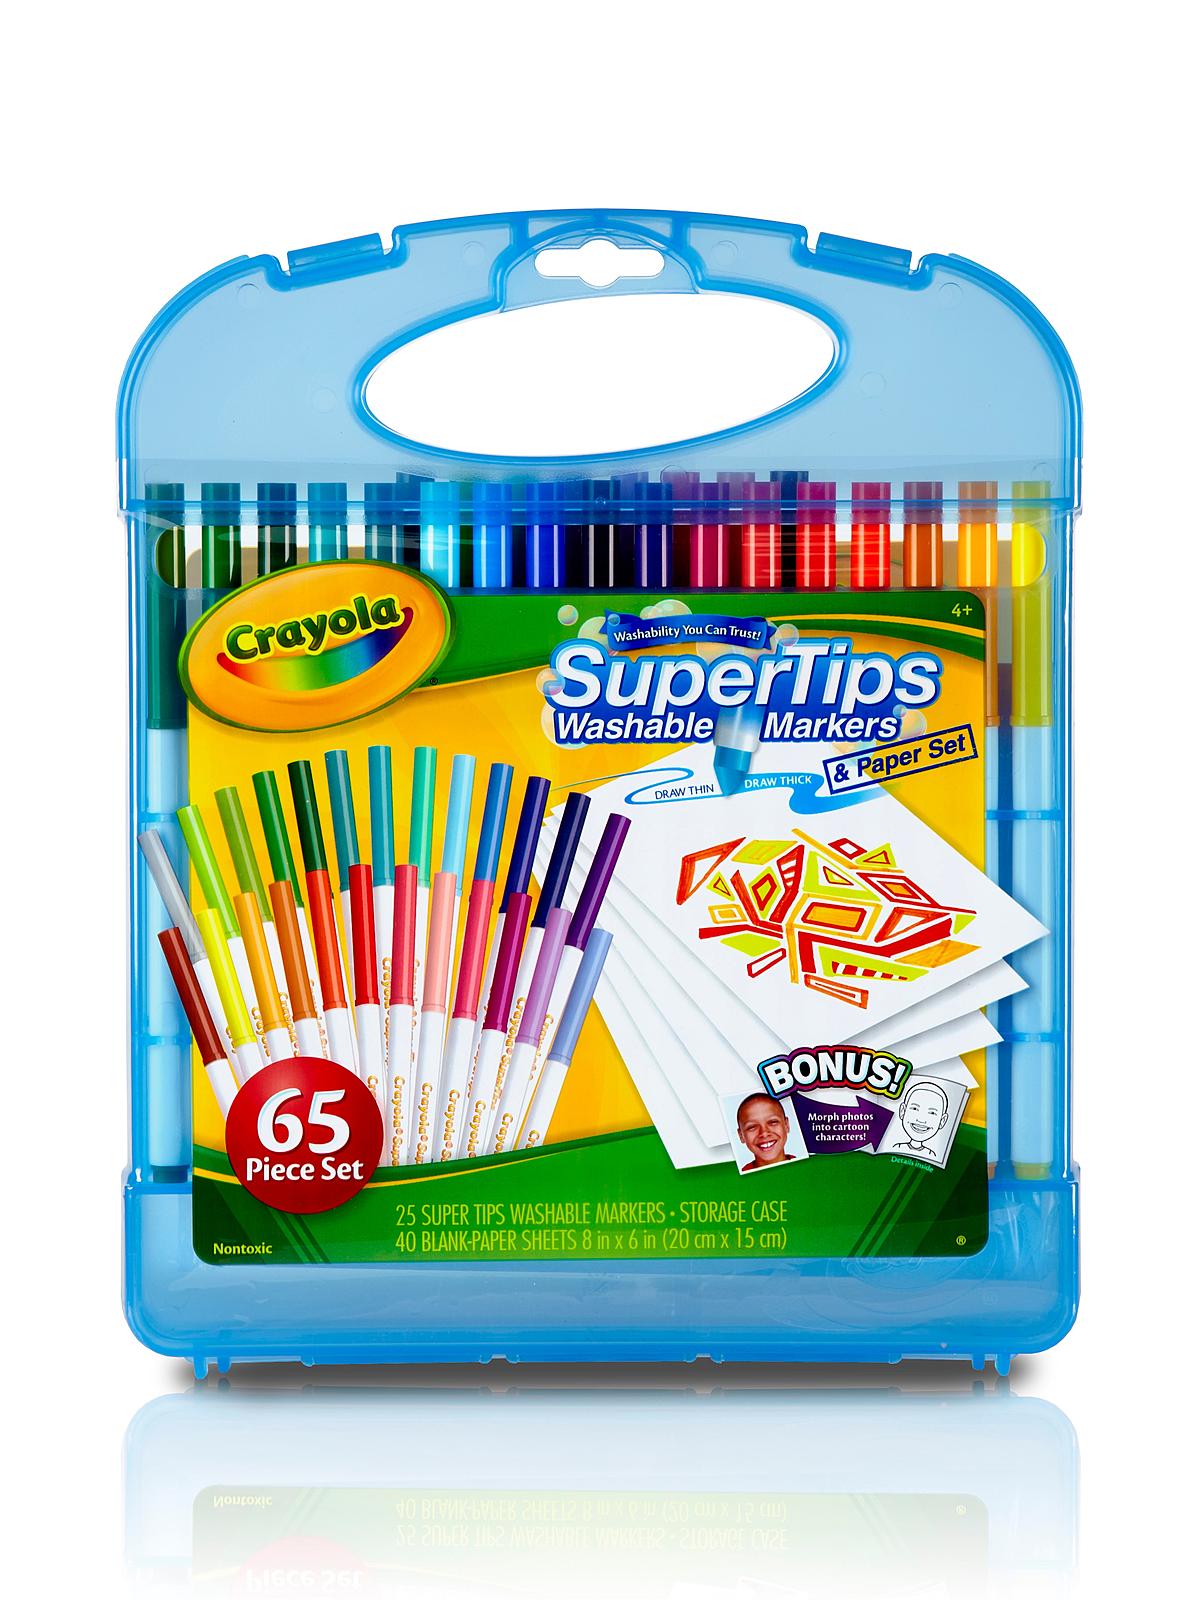 Super Tips Washable Markers Kit Each